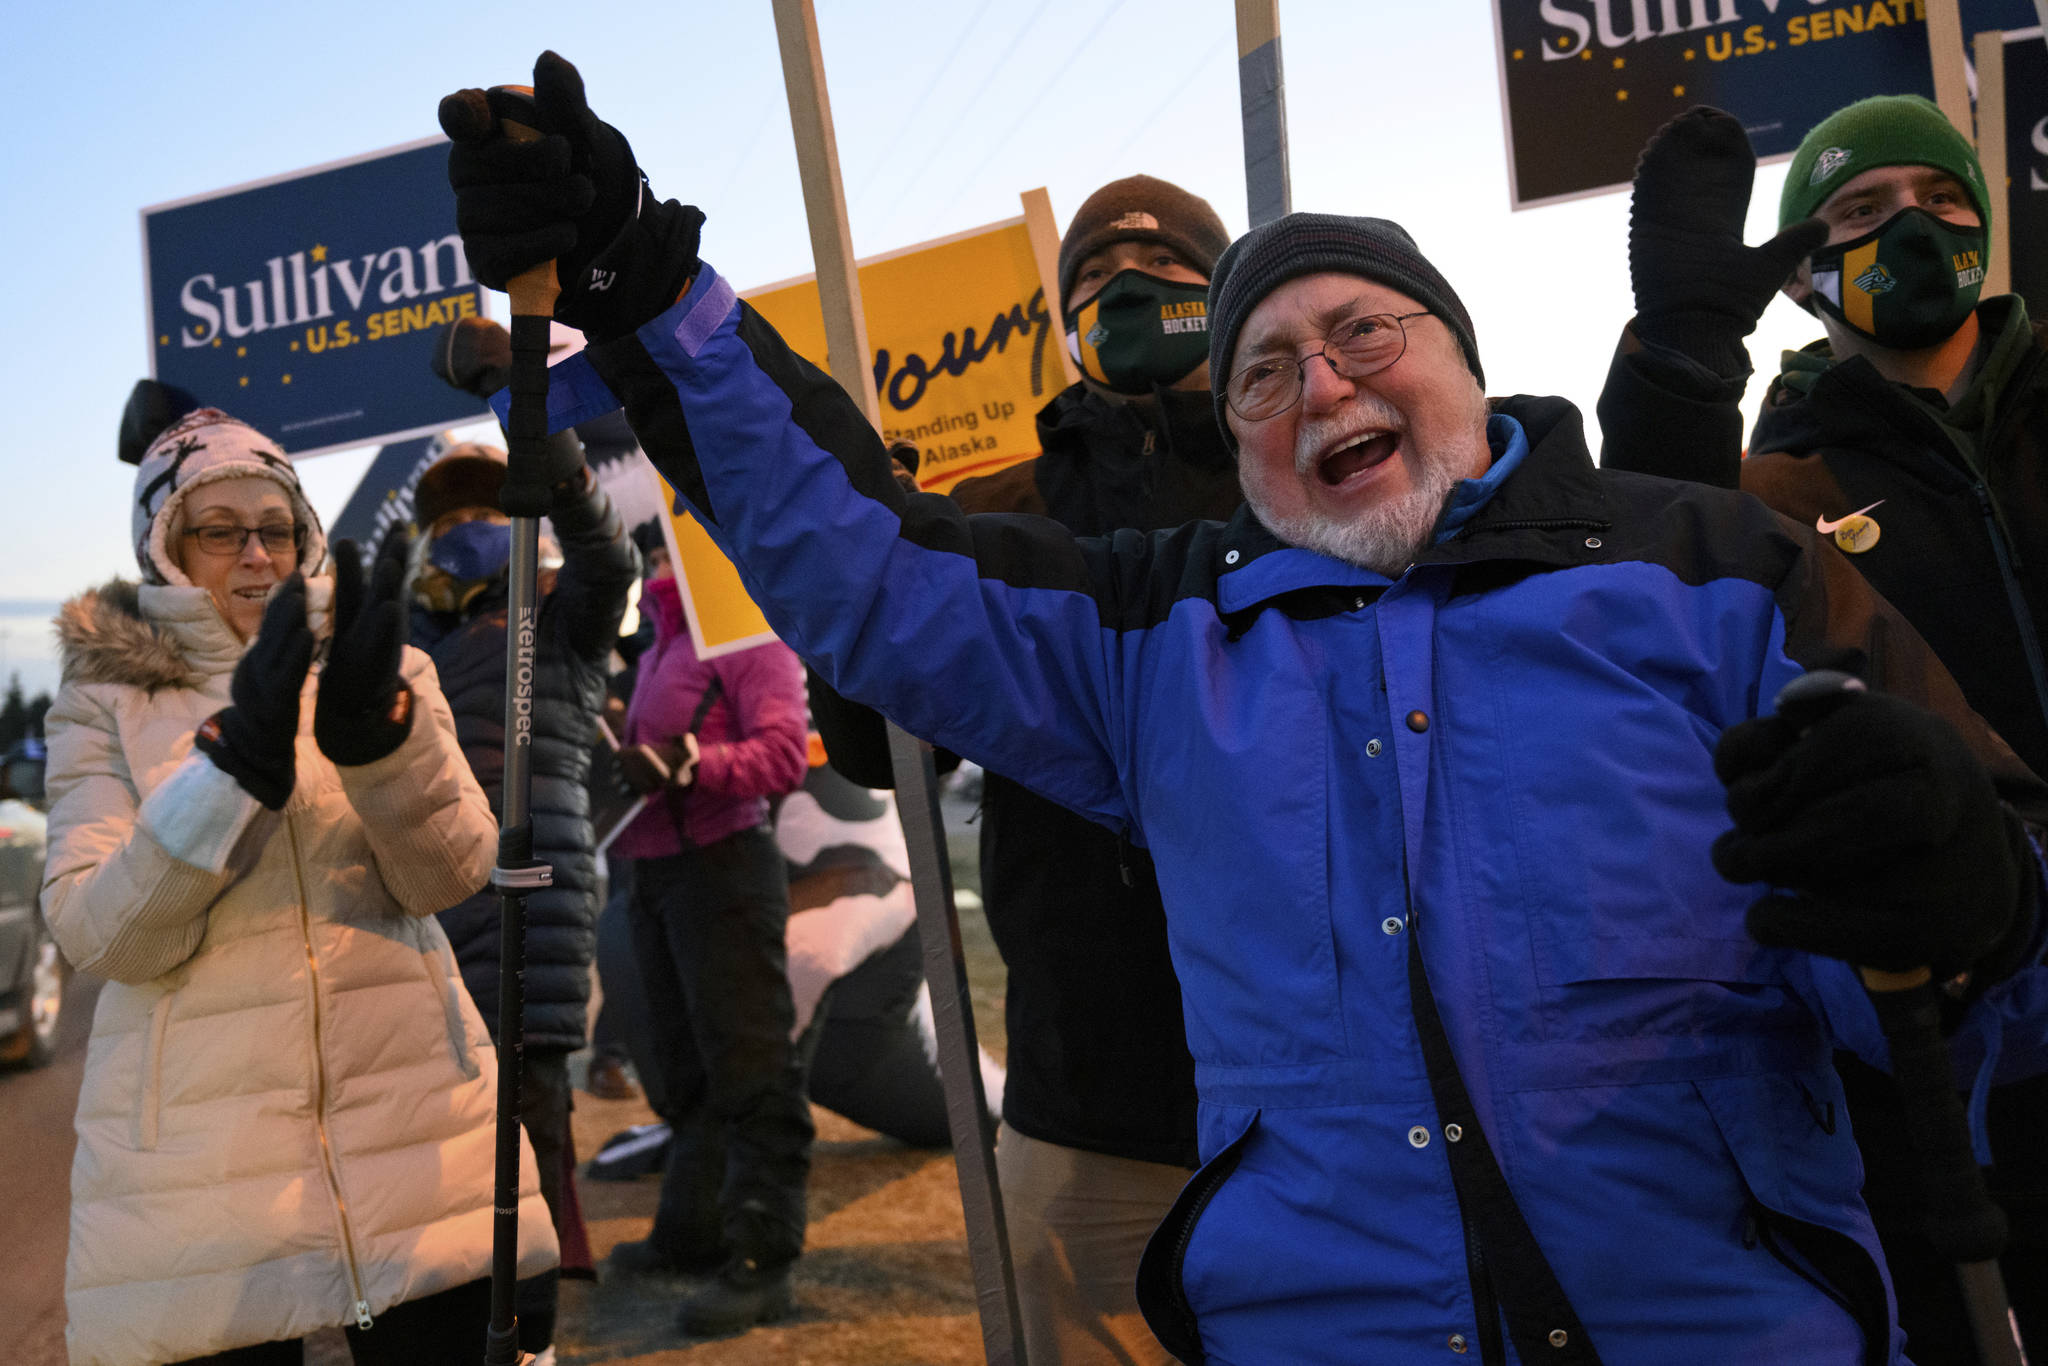 In this Nov. 3, 2020, photo, Rep. Don Young, R-Alaska, gathers with supporters in Anchorage. Young, the longest-serving Republican ever in the U.S. House, has won his 25th term. Young defeated Alyse Galvin in back-to-back elections for Alaska’s sole seat in the House. The race was called Wednesday, Nov. 11. (Marc Lester/Anchorage Daily News)